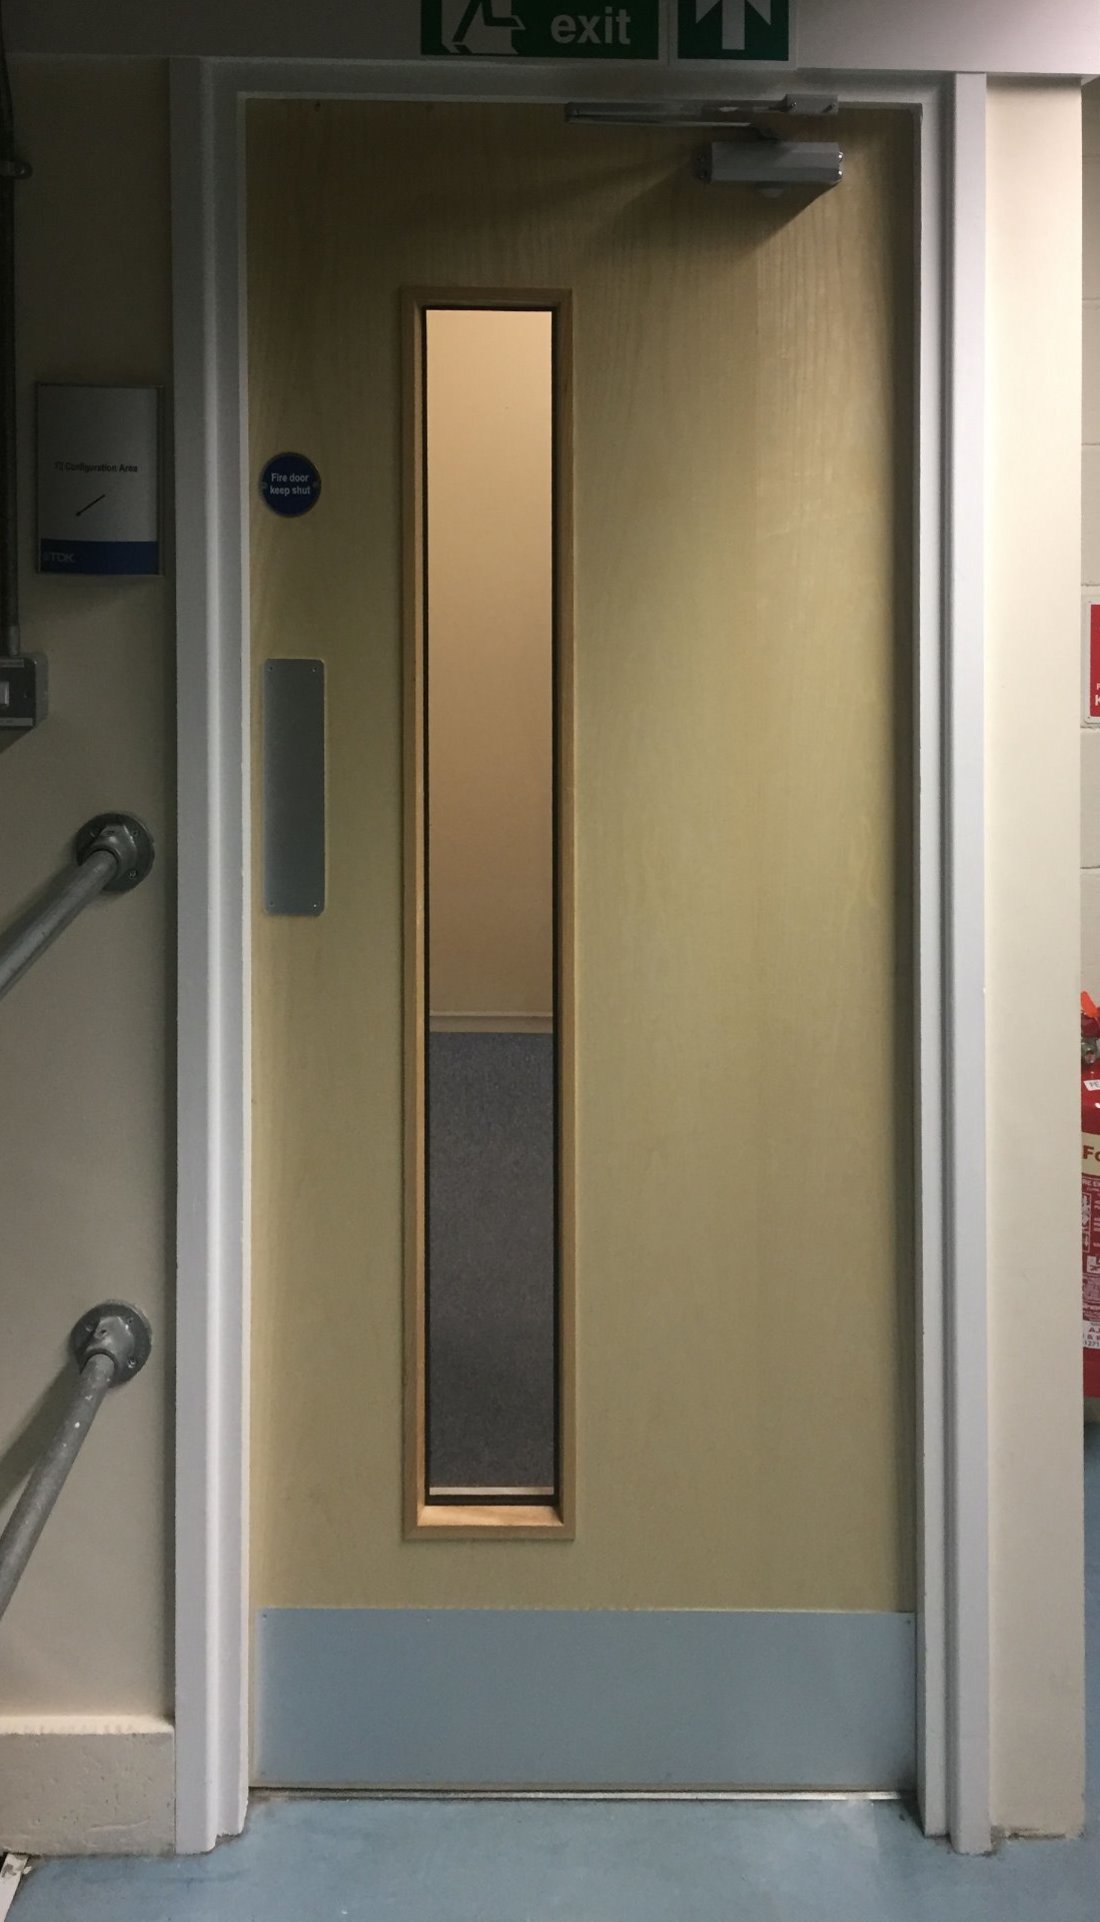 Old doors removed, installed replacement Ash doors with vision panels. New fire rated ironmongery fitted, correct signage, door closures and intumescent smoke seals for a North Devon Factory